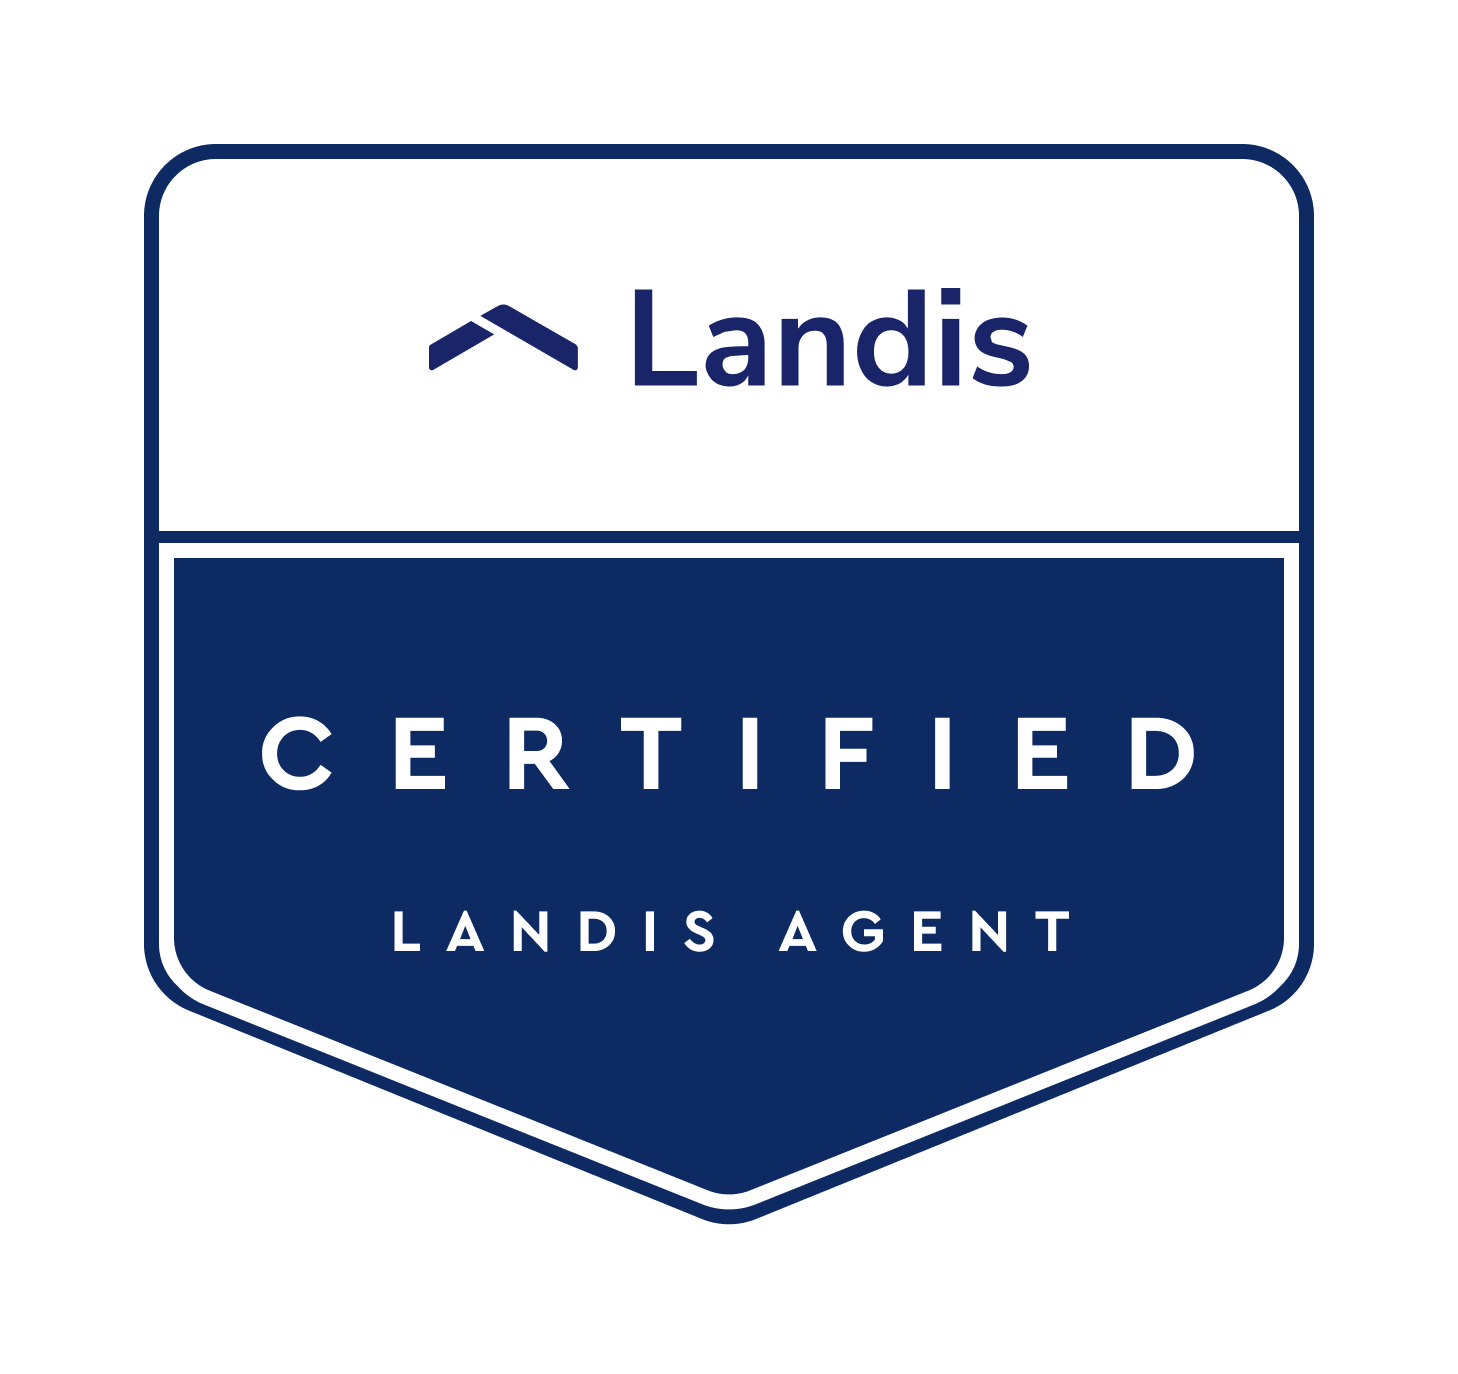 A blue and white logo for landis